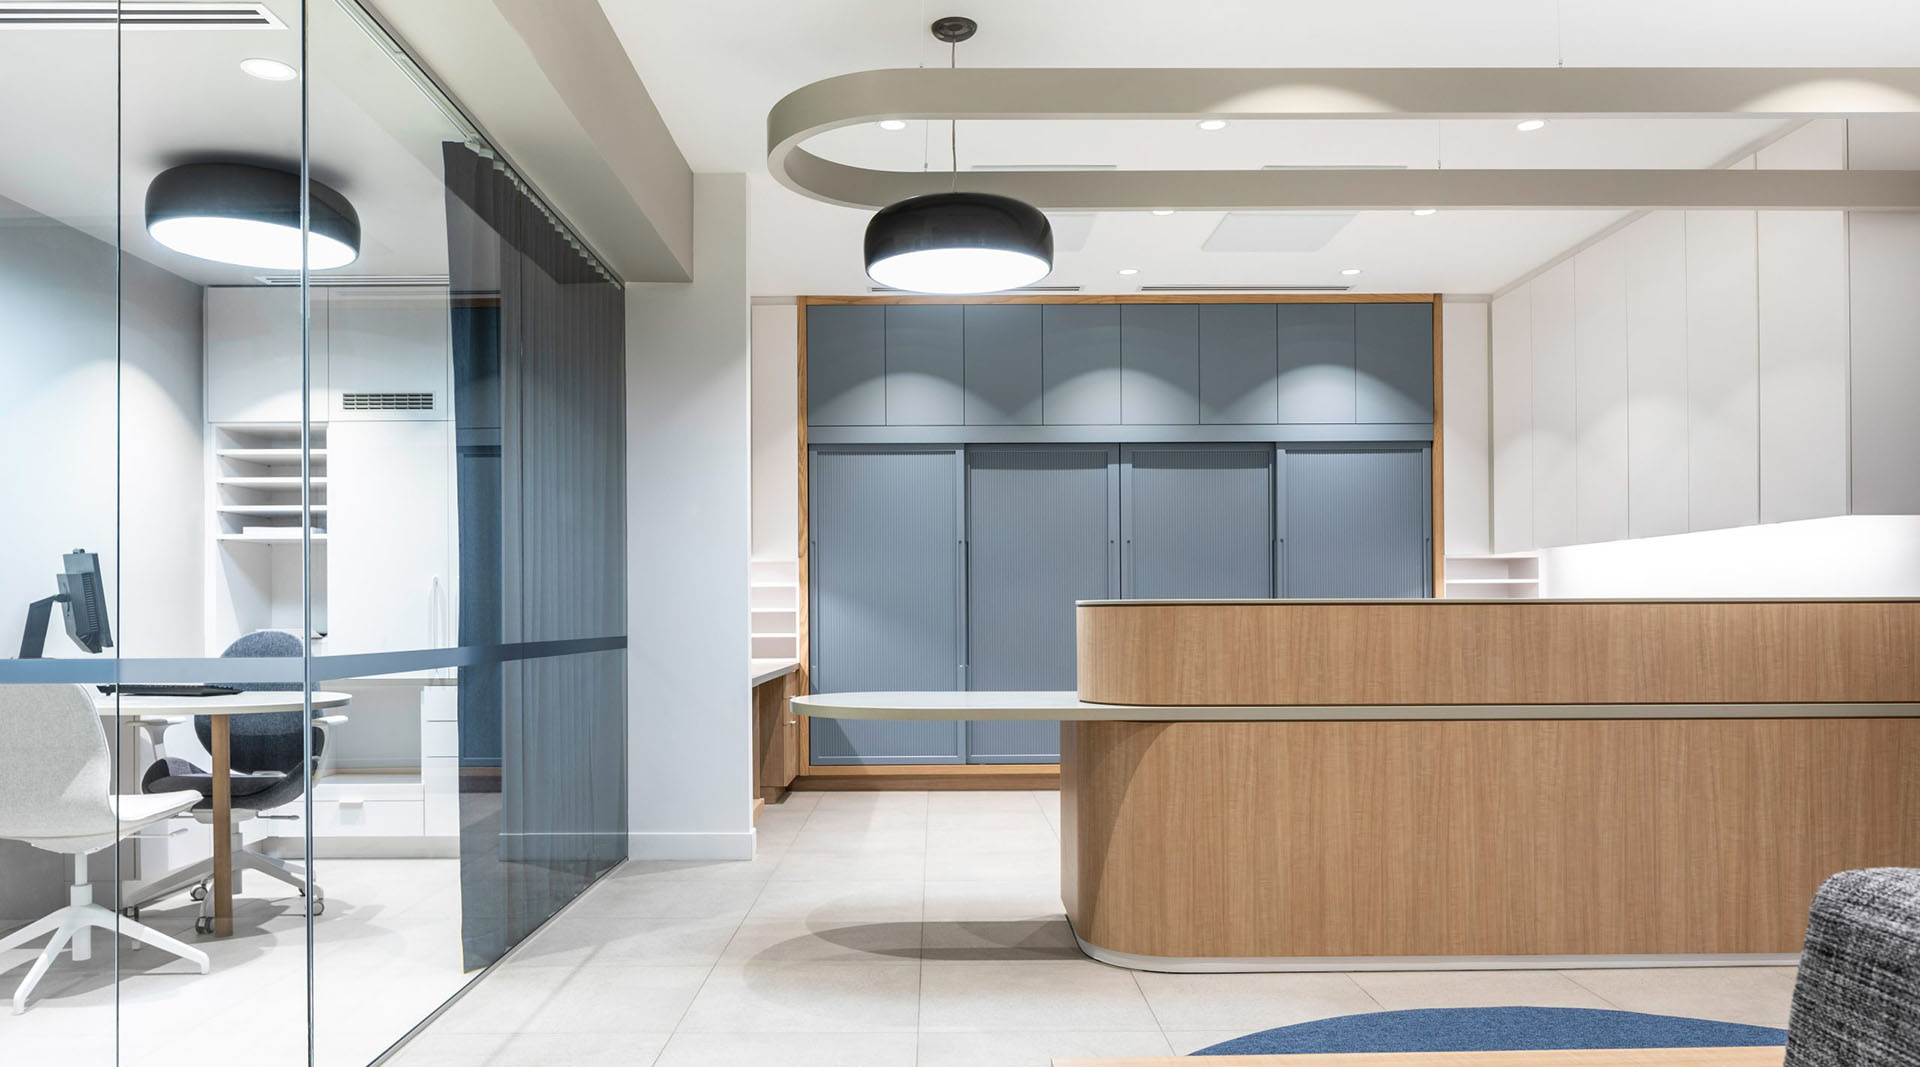 Dental office interior showing reception desk, lighting fixtures, glass walls for the consultation room, and patient waiting area